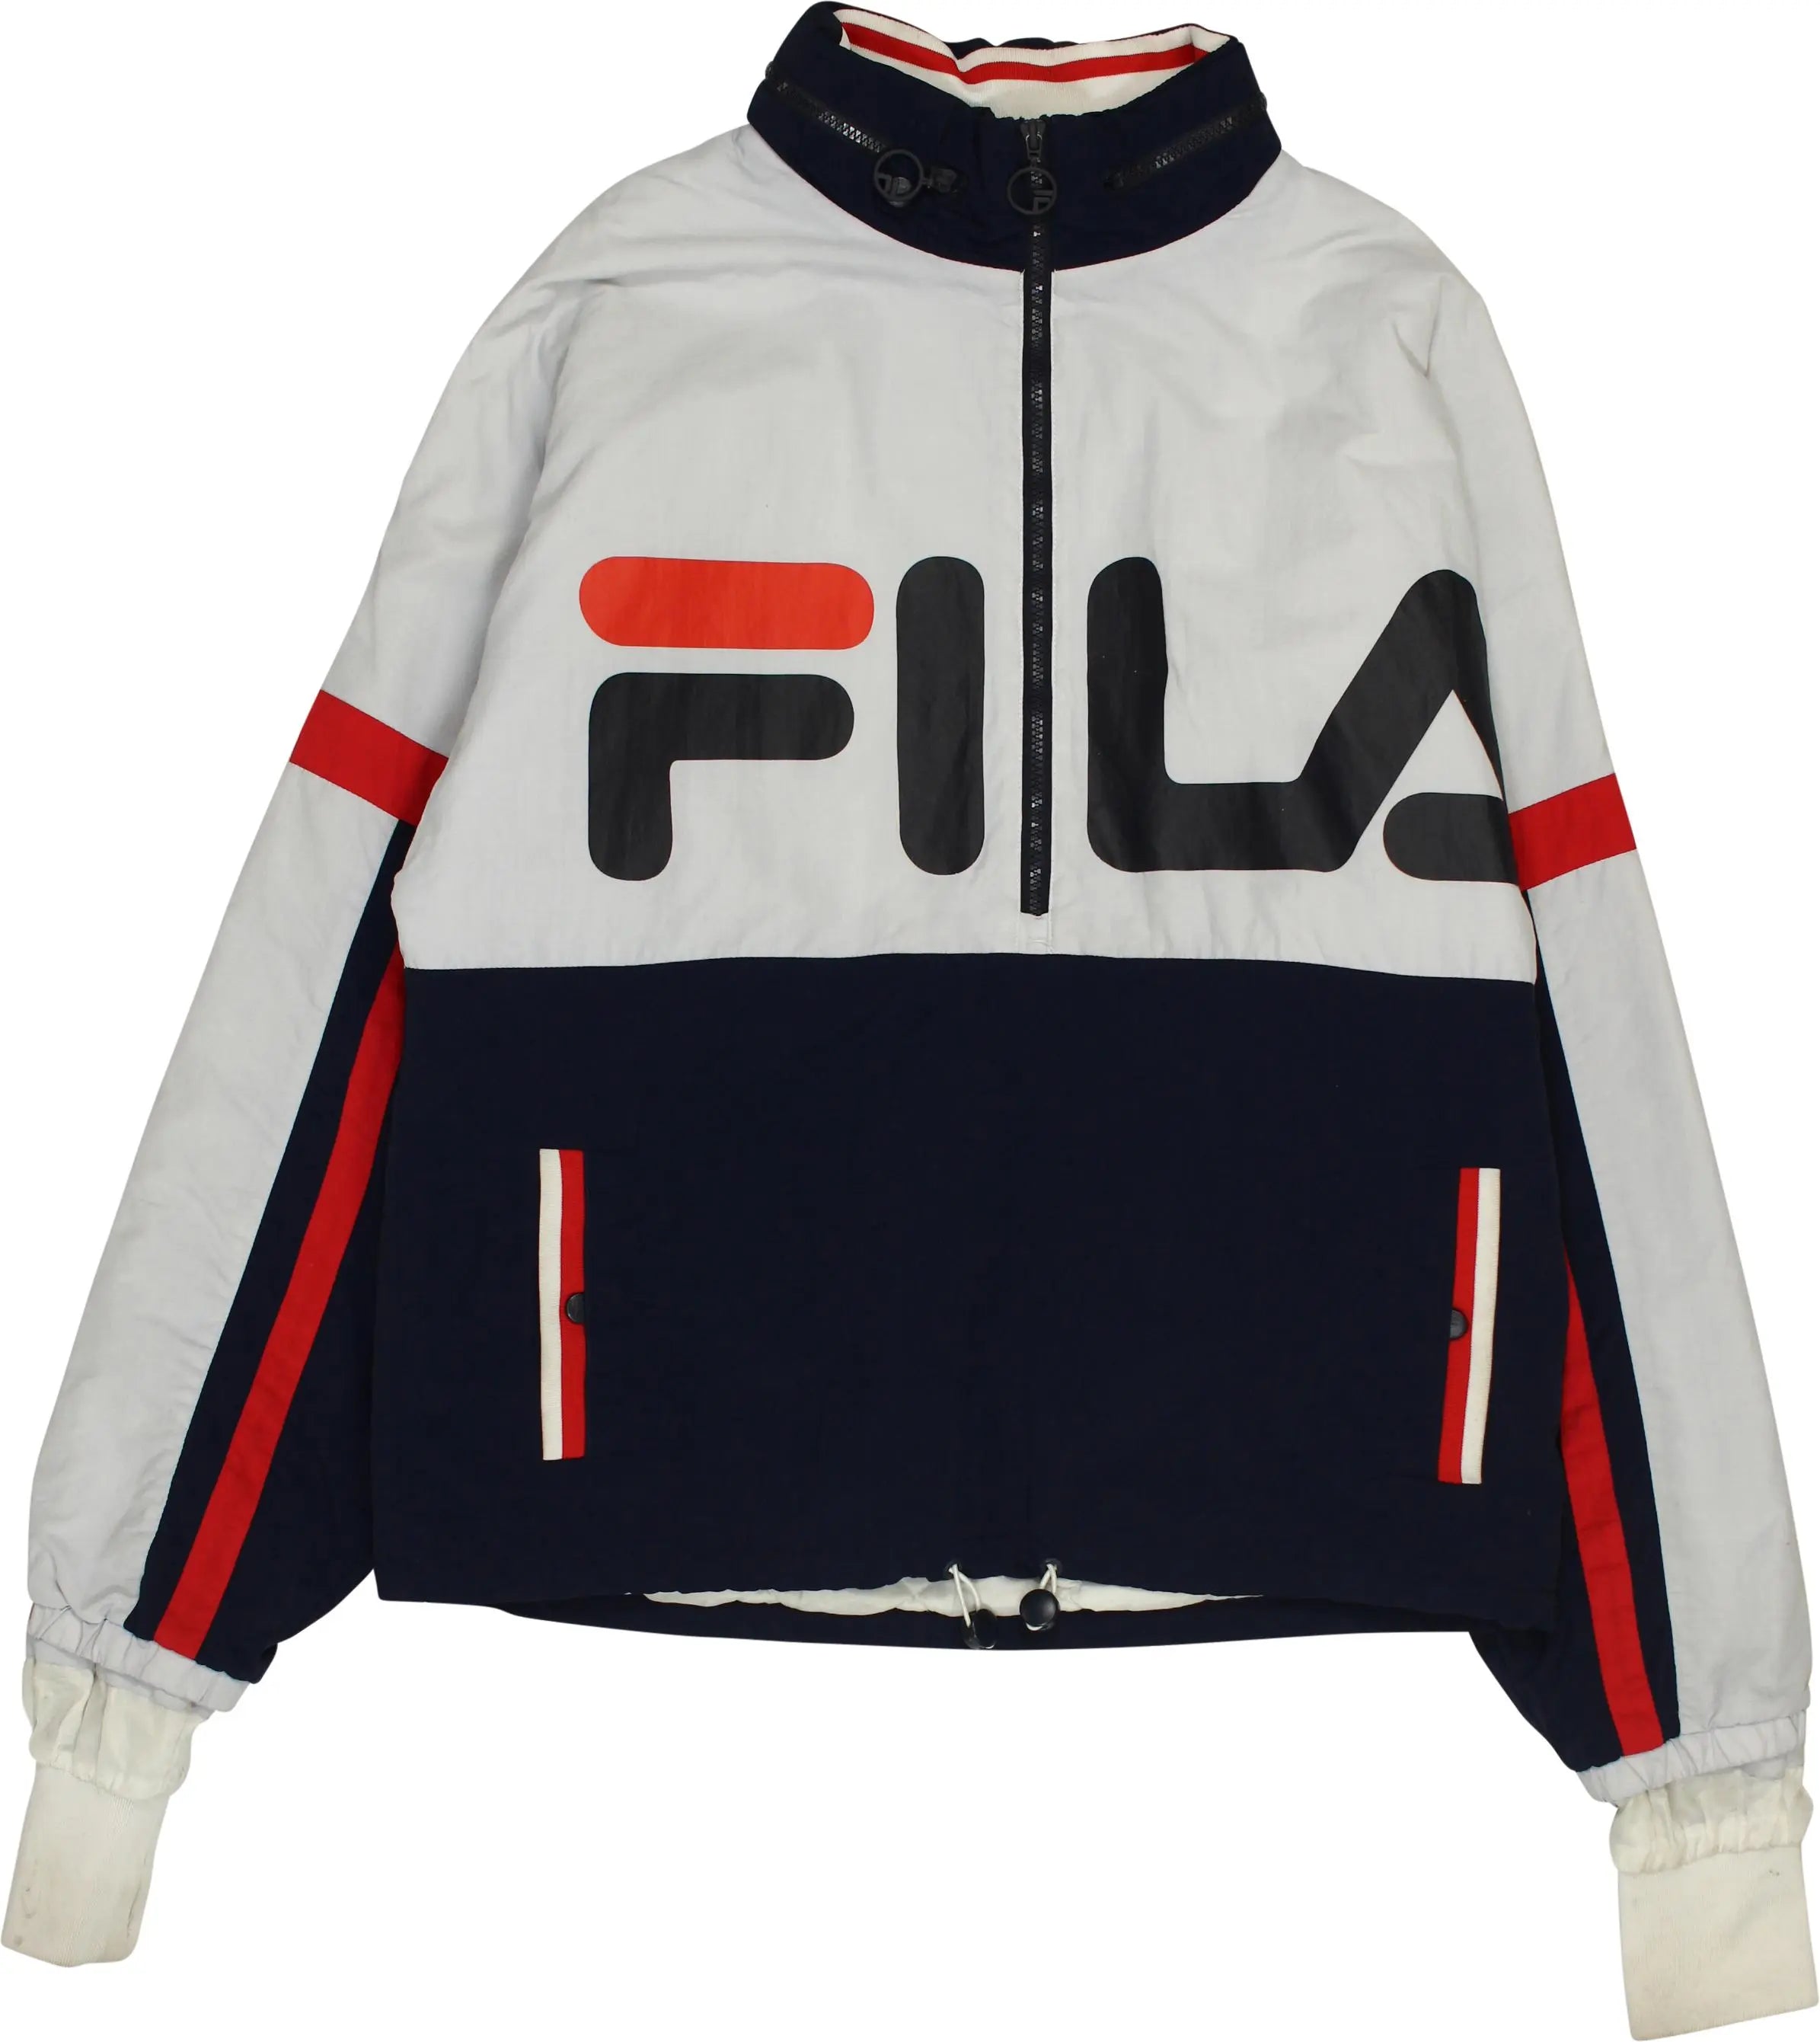 Fila - Jacket by Fila- ThriftTale.com - Vintage and second handclothing